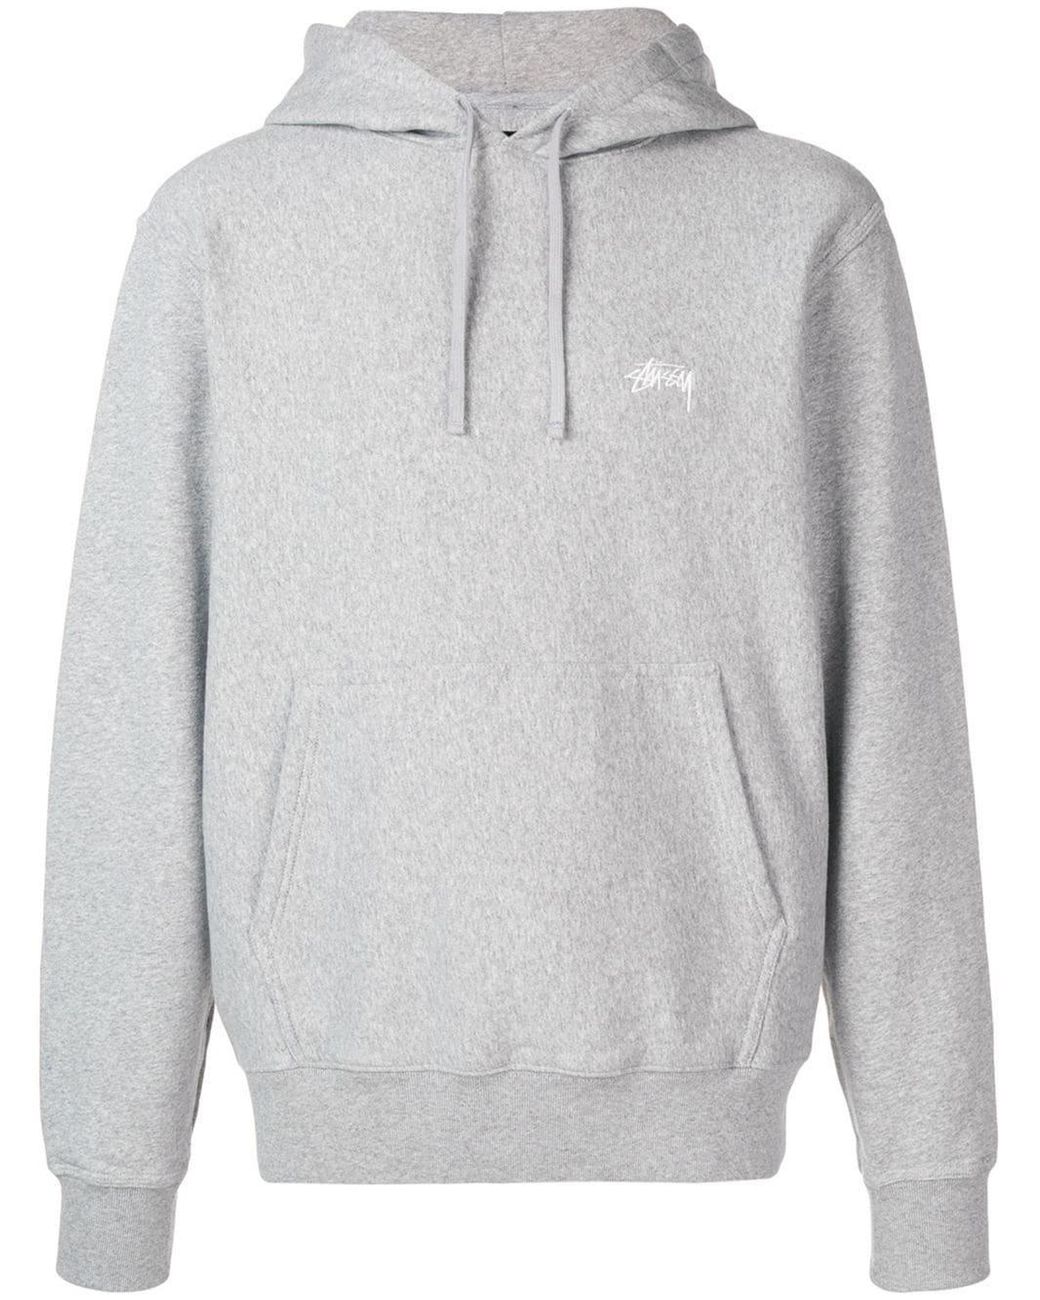 Stussy Cotton Classic Brand Hoodie in Grey (Gray) for Men - Lyst